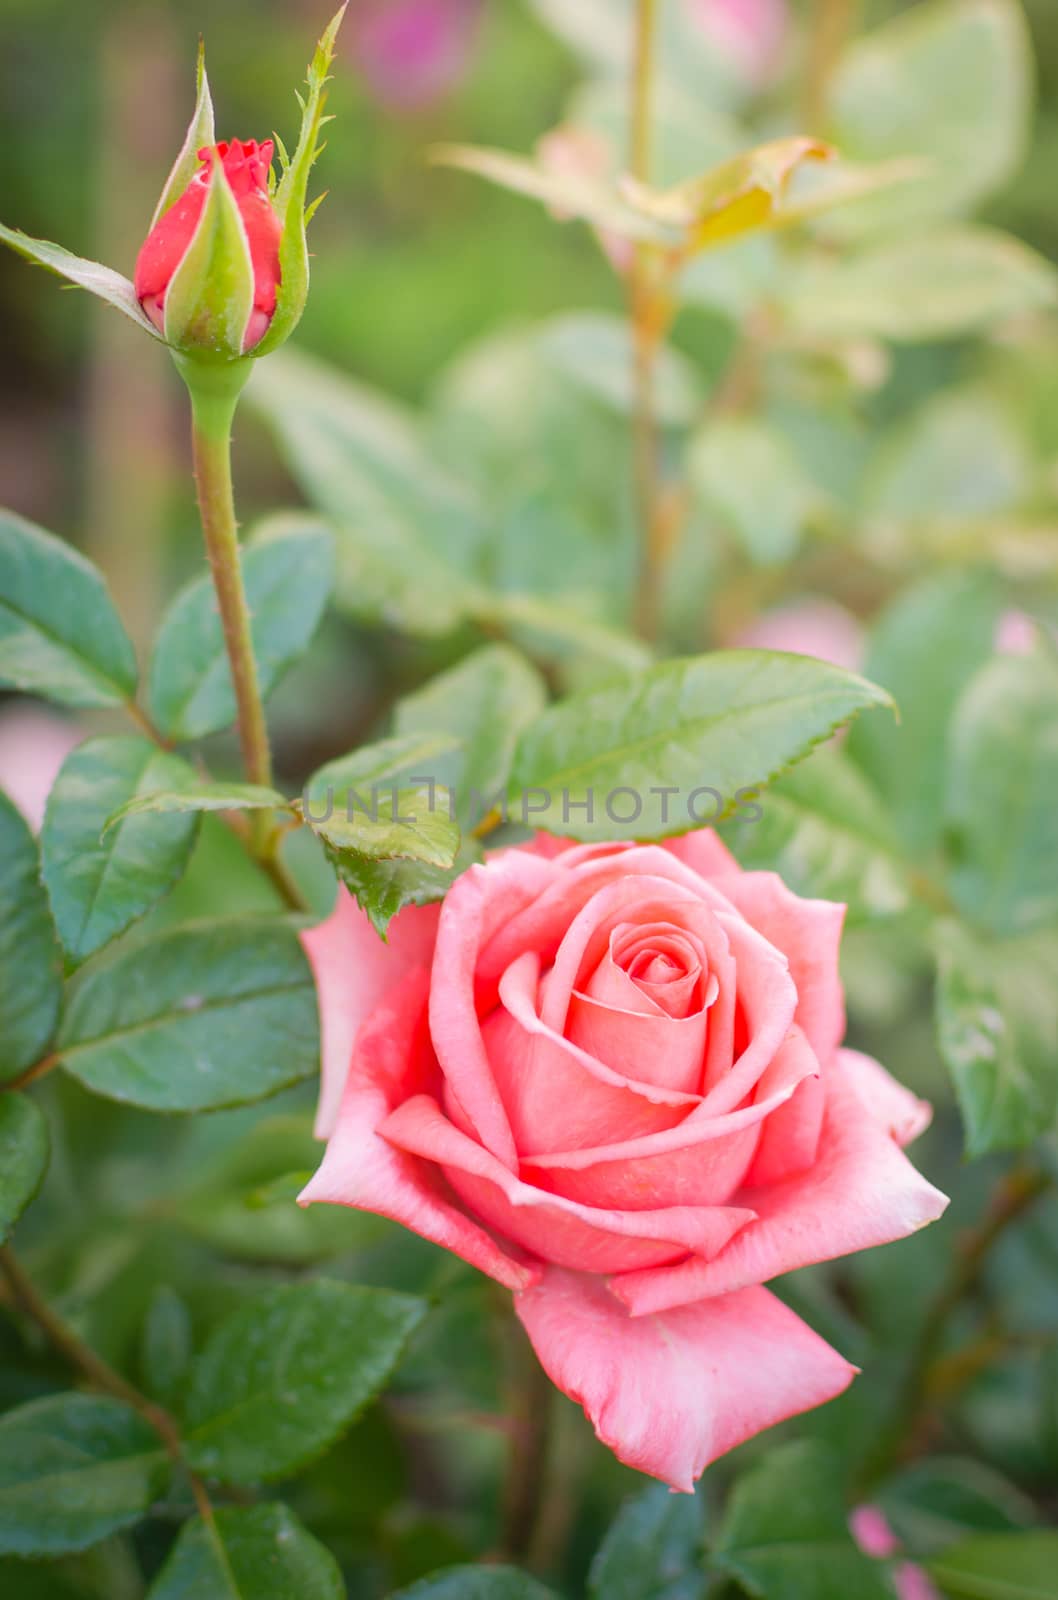 Beautiful pink rose in a garden by nop16